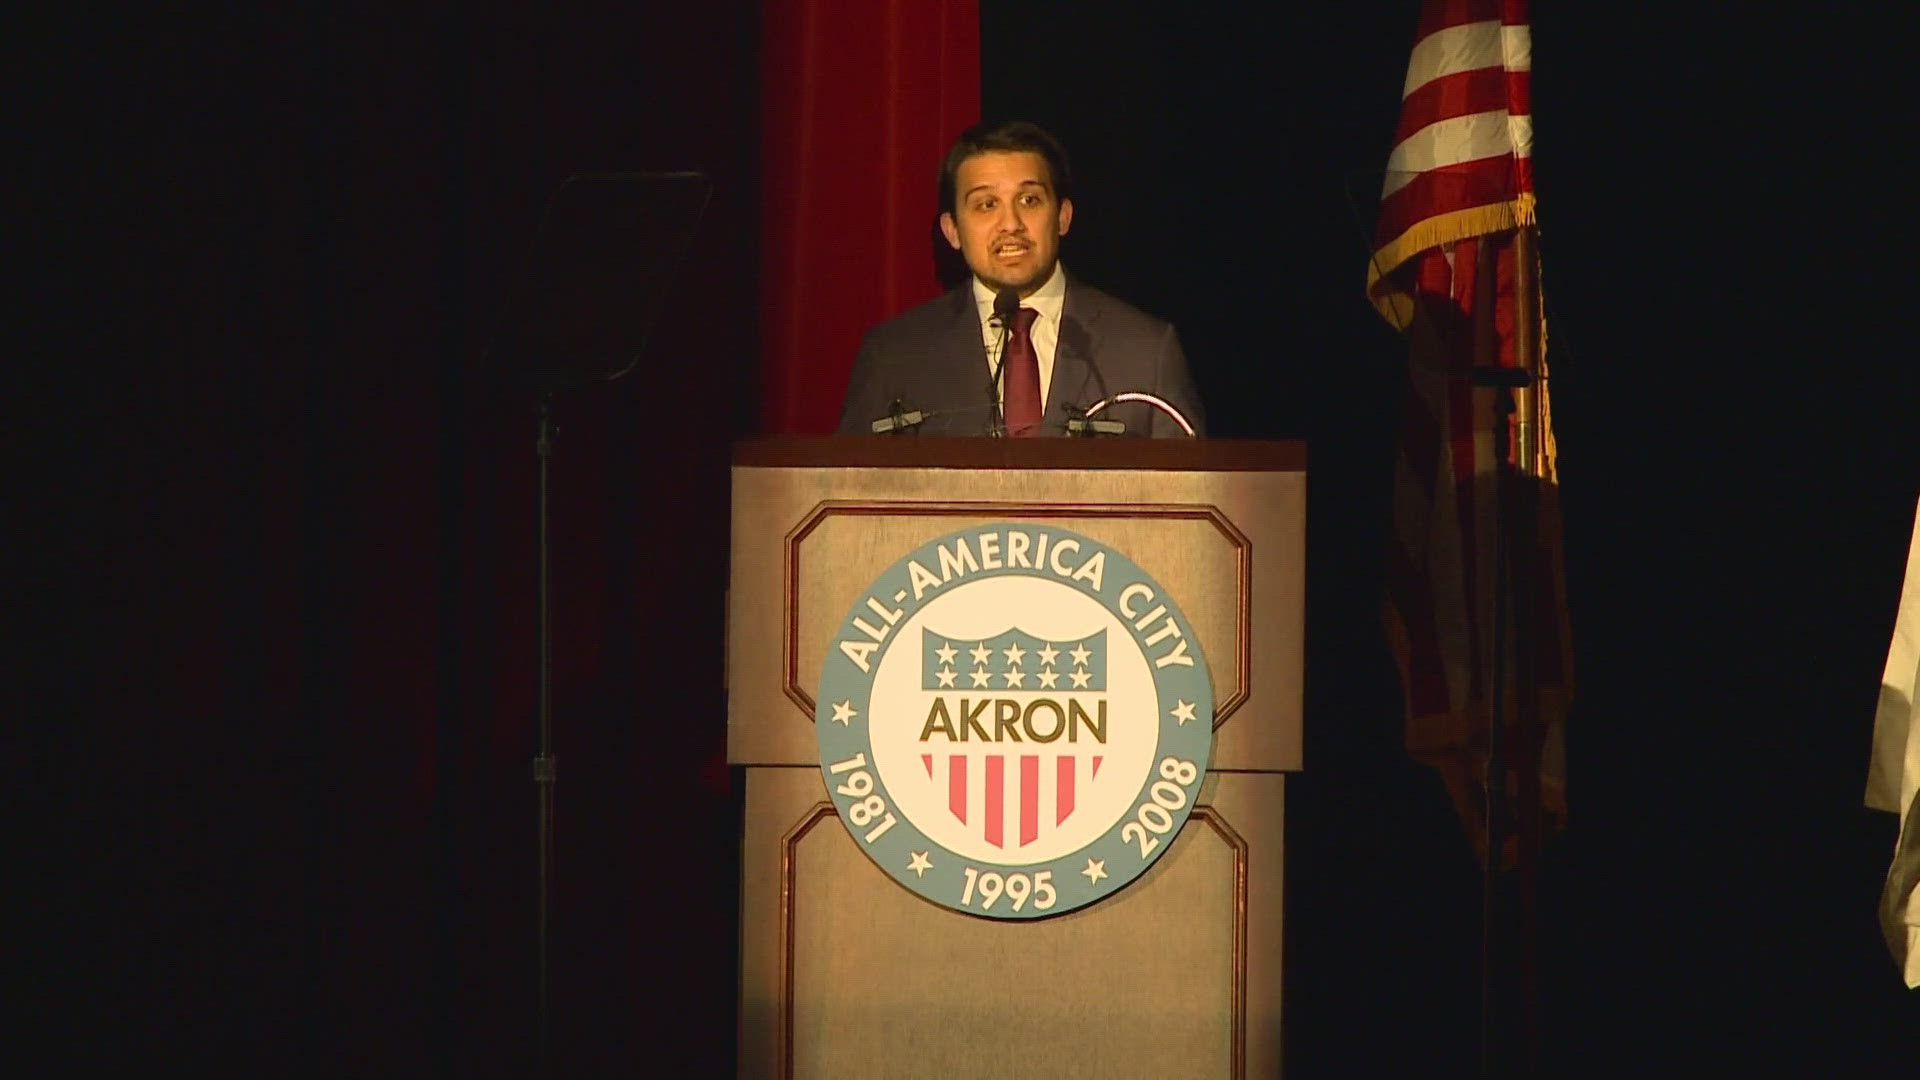 'The reason I'm excited for Akron is all of you,' Malik told those assembled. 'It's the energy for change that we are building together.'